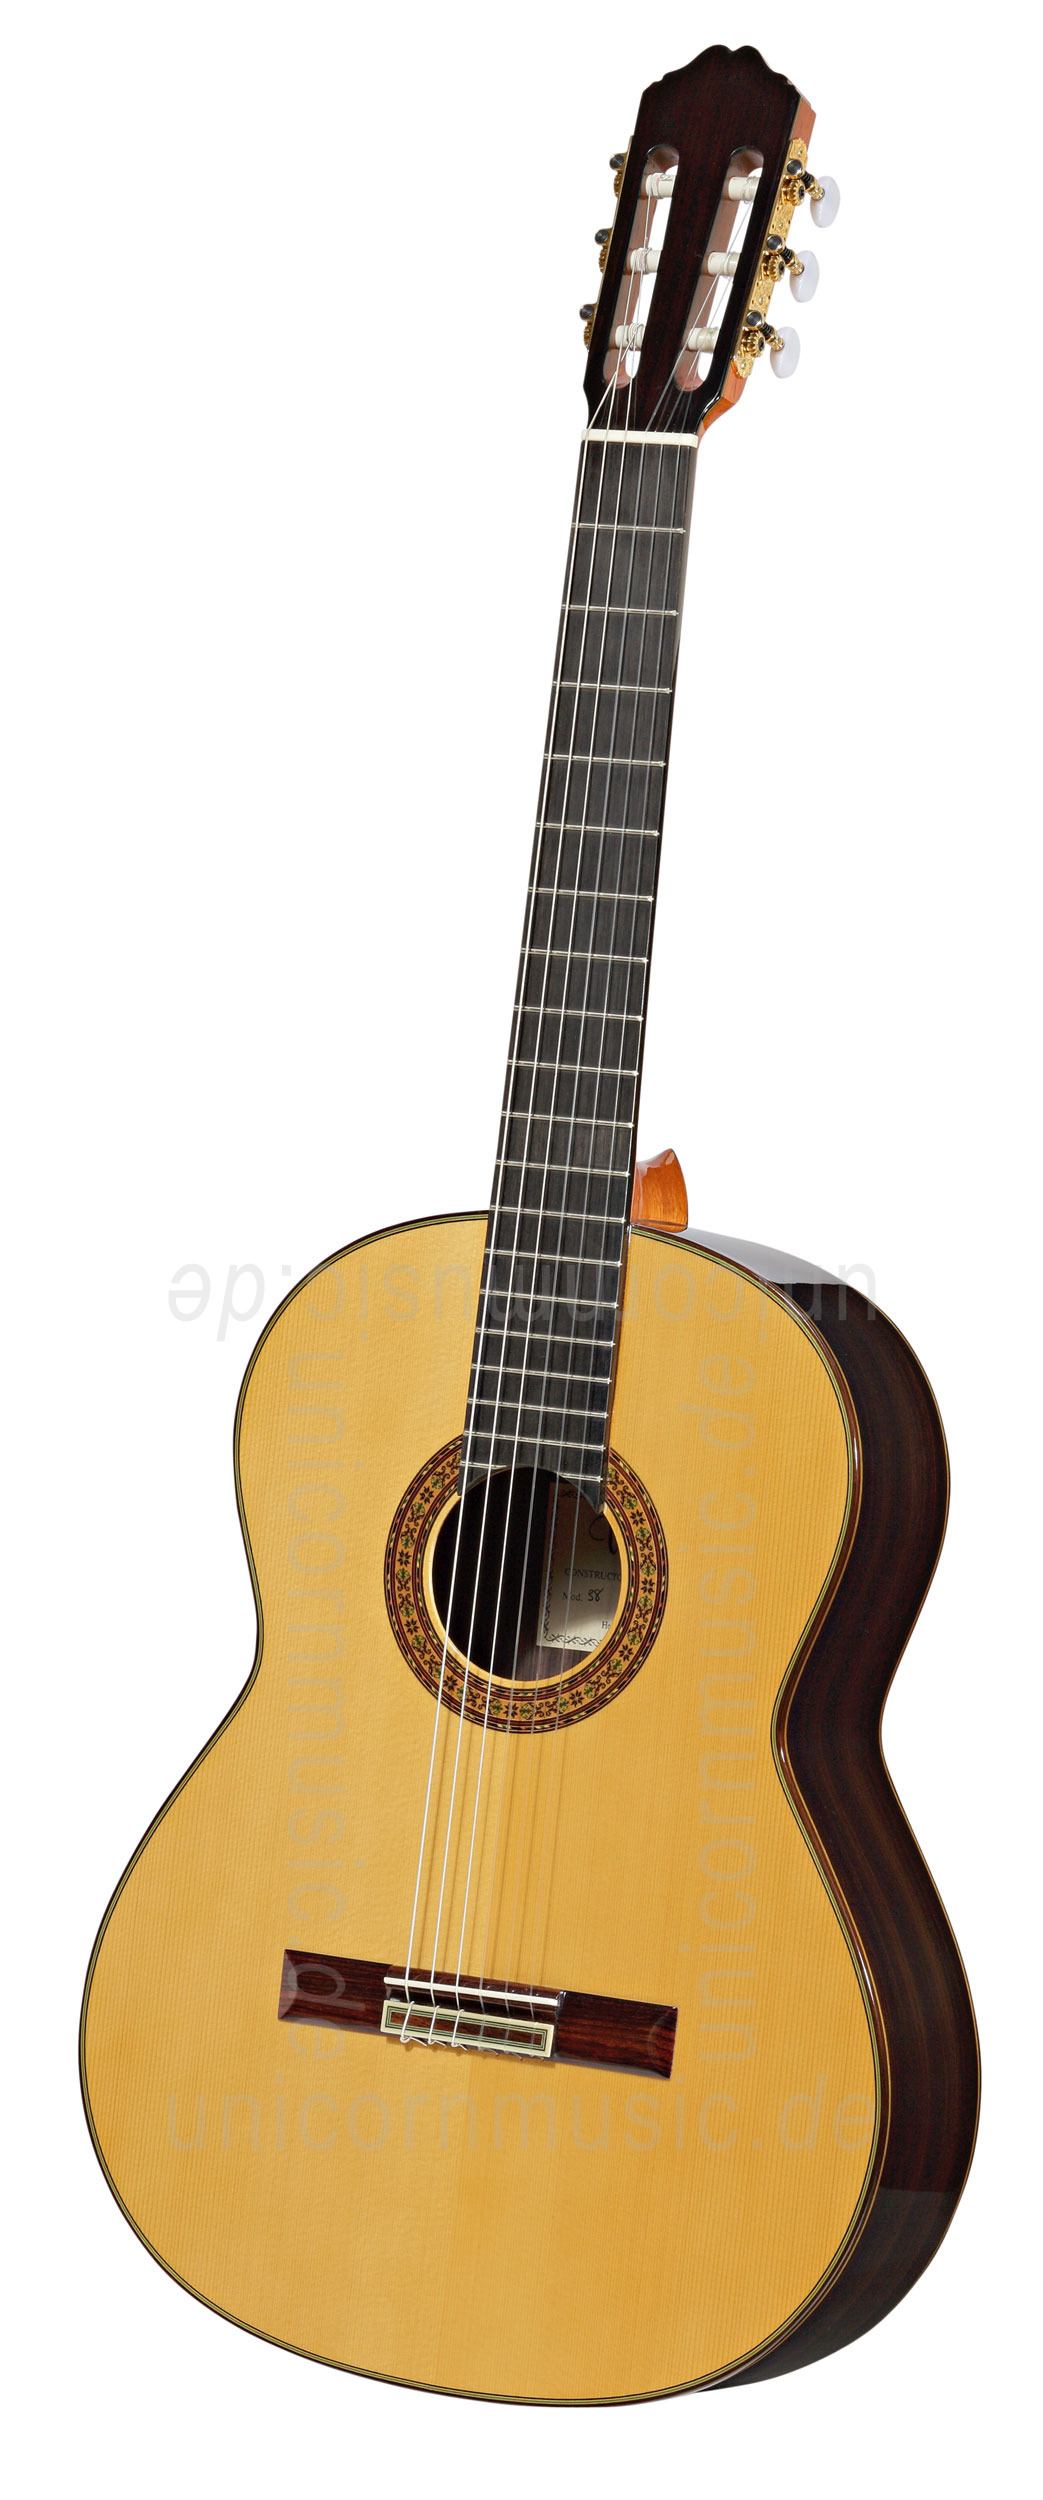 to article description / price Spanish Classical Guitar VALDEZ MODEL 38 S - all solid - spruce top